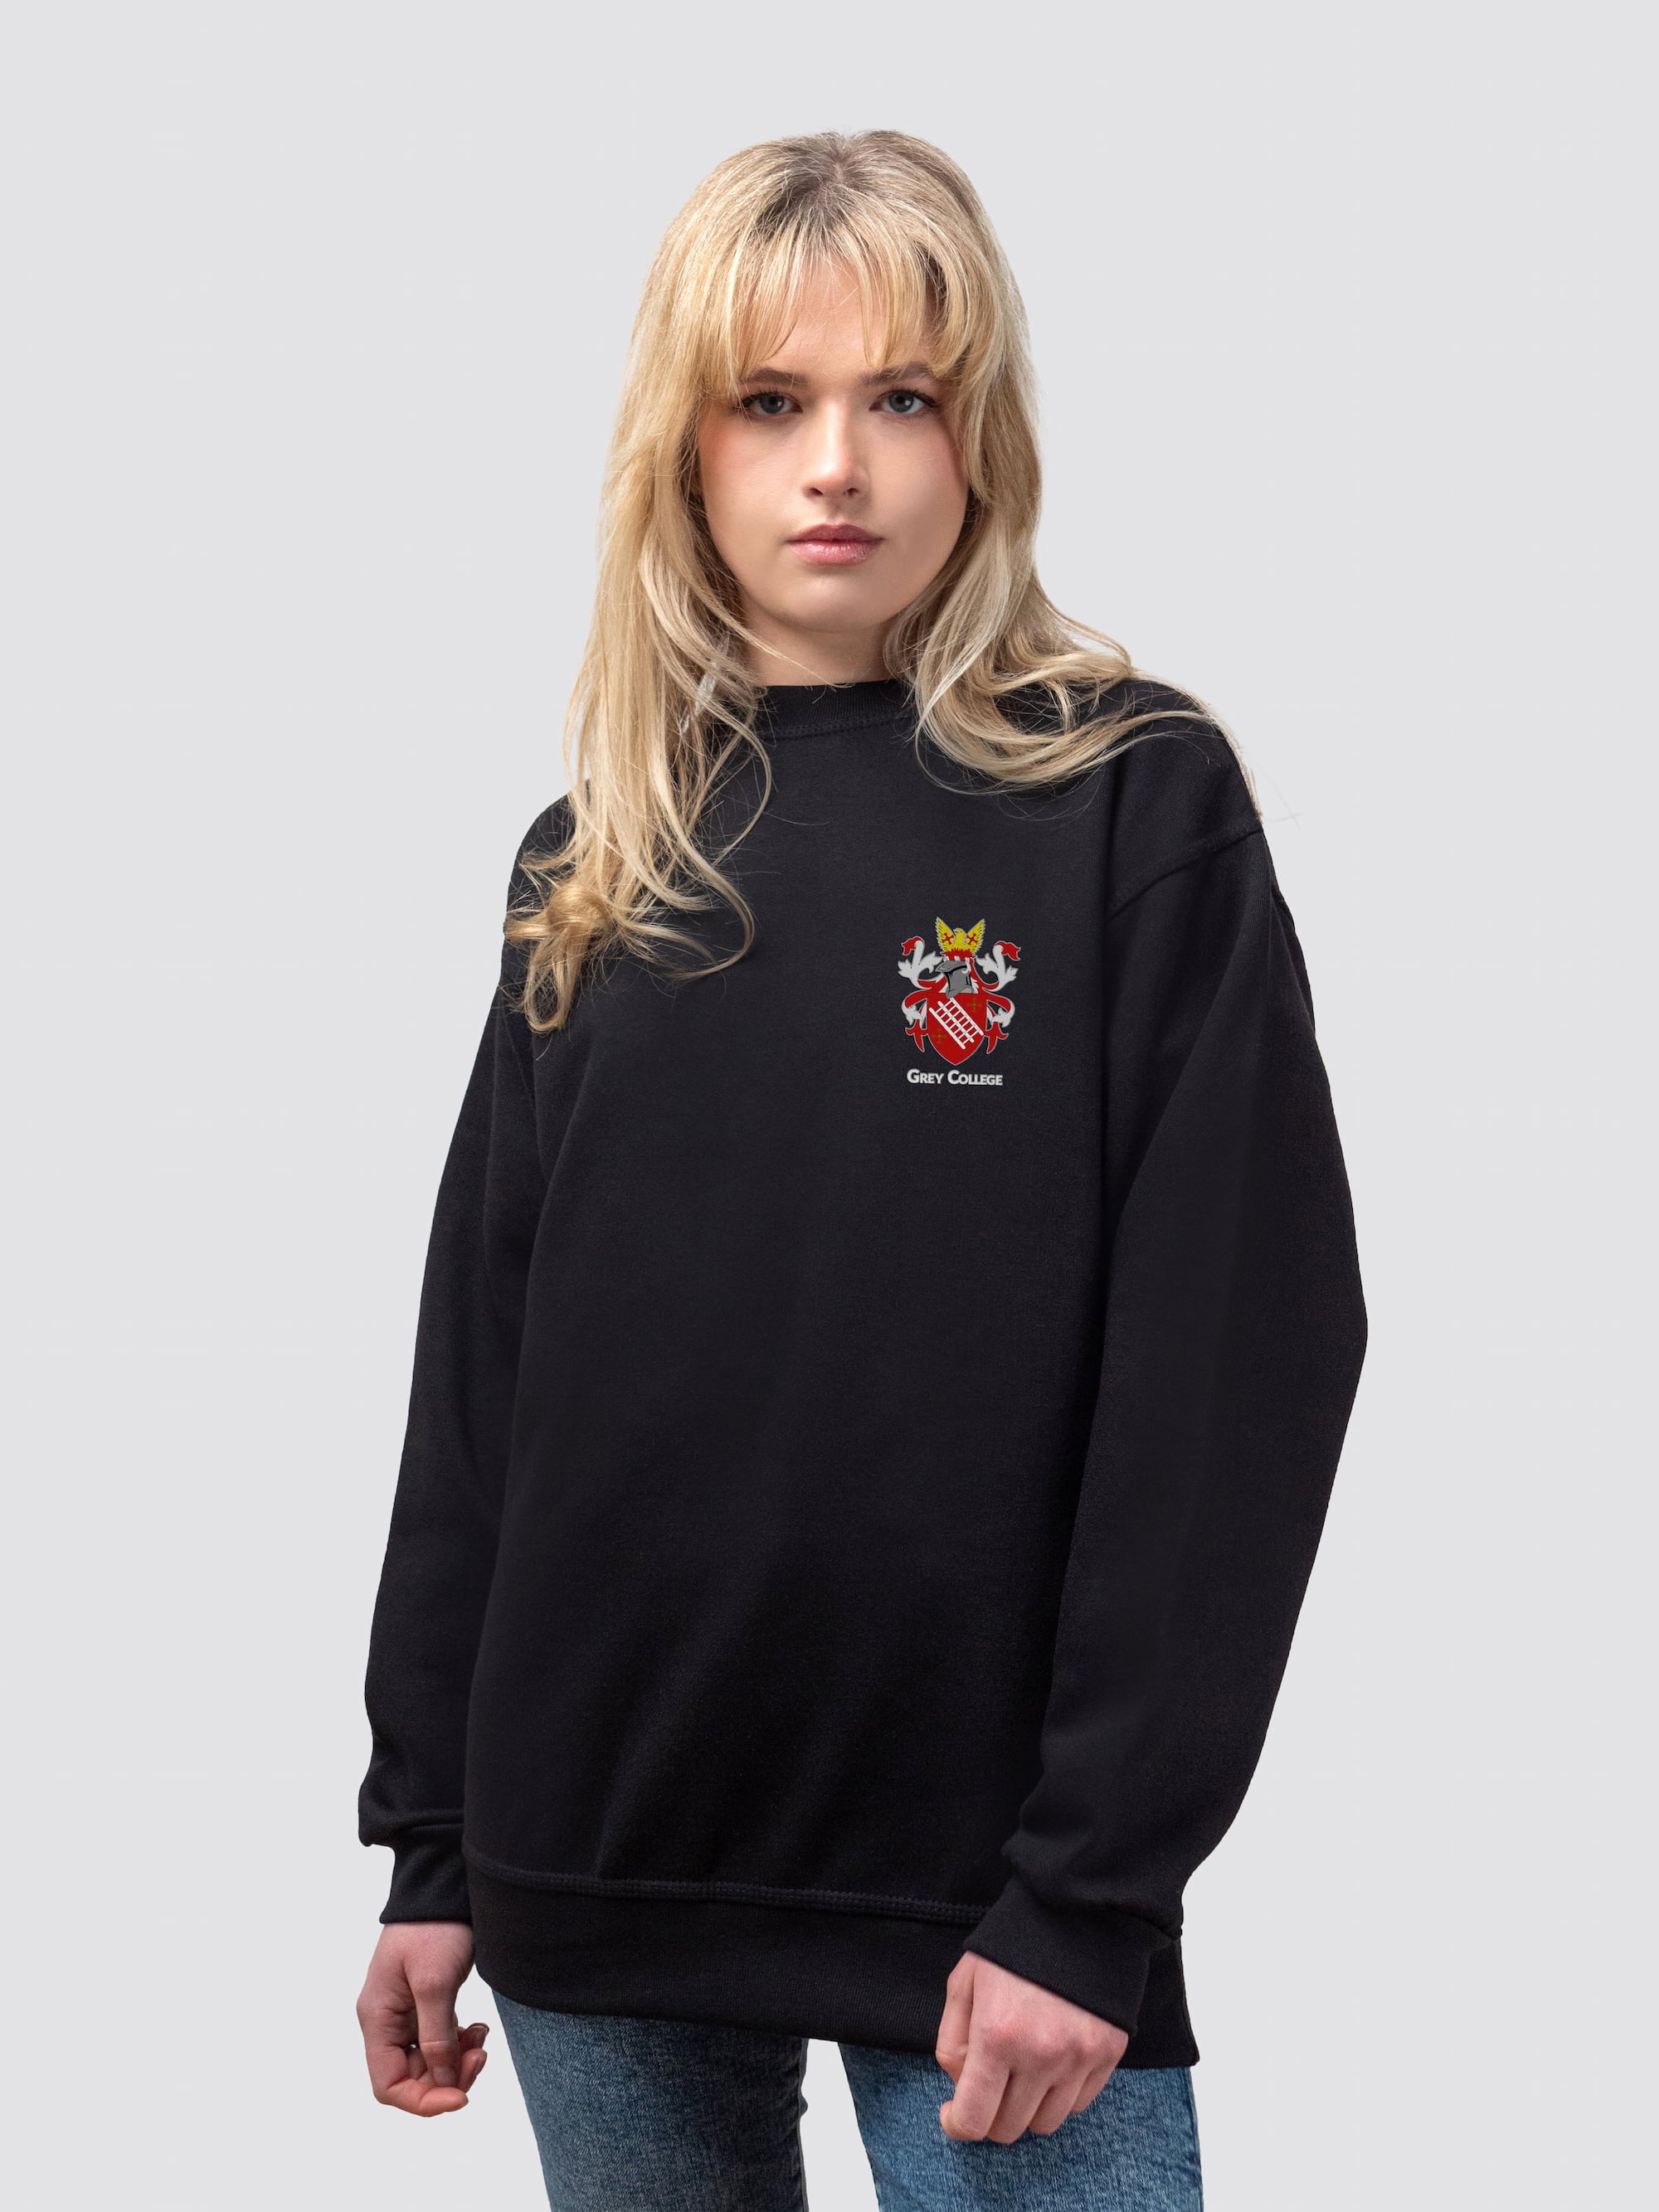 Grey College crest on the front of a black, crew-neck sweatshirt